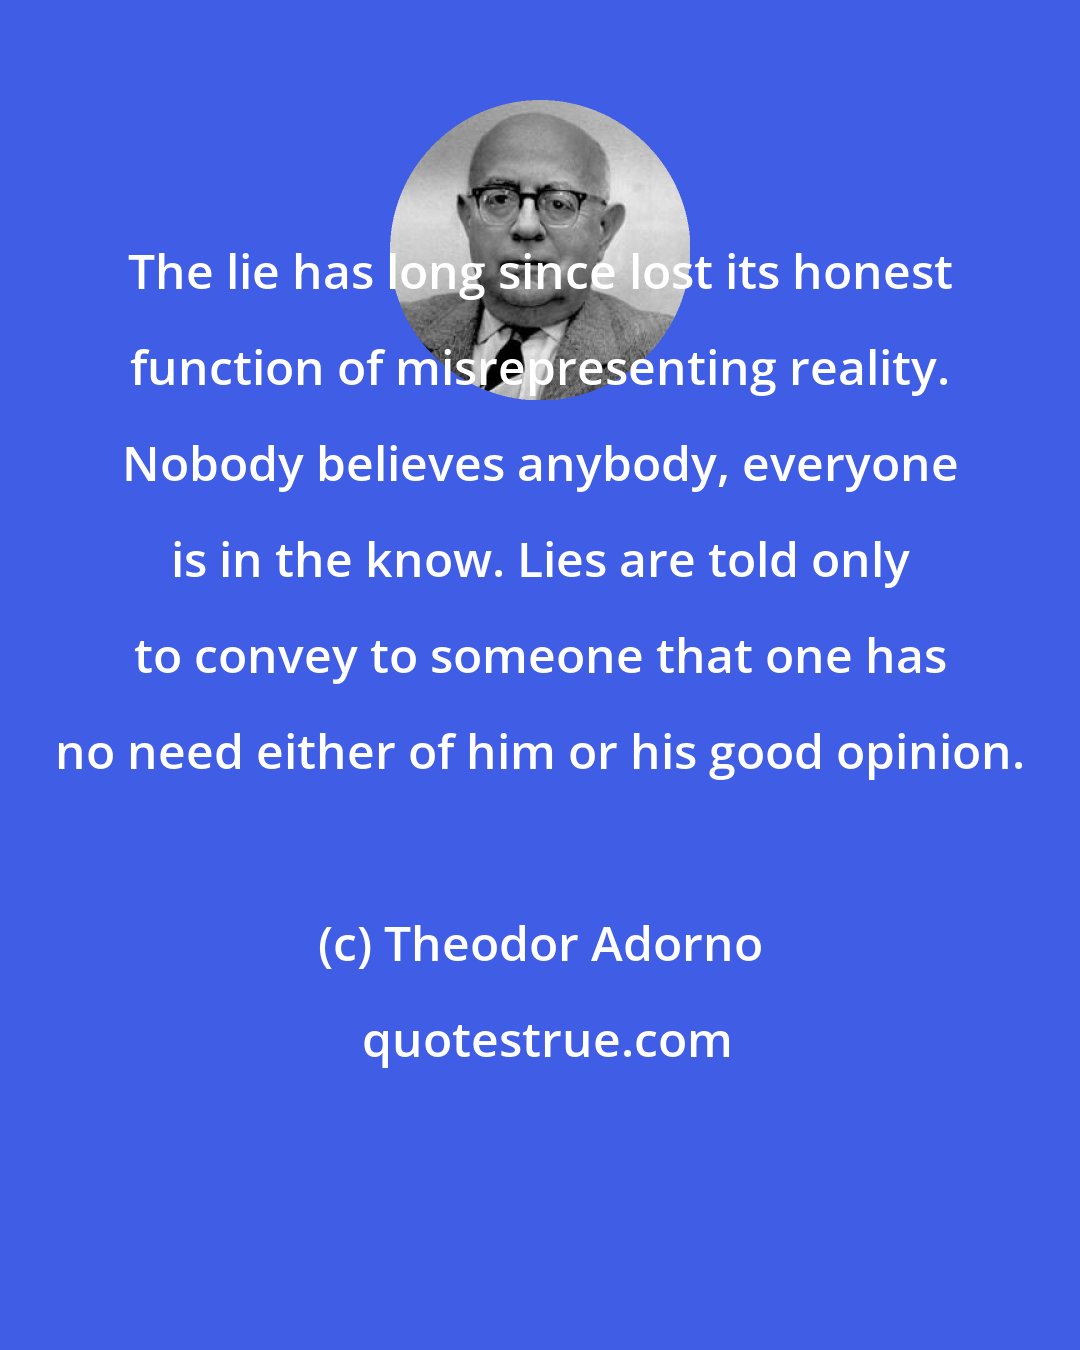 Theodor Adorno: The lie has long since lost its honest function of misrepresenting reality. Nobody believes anybody, everyone is in the know. Lies are told only to convey to someone that one has no need either of him or his good opinion.